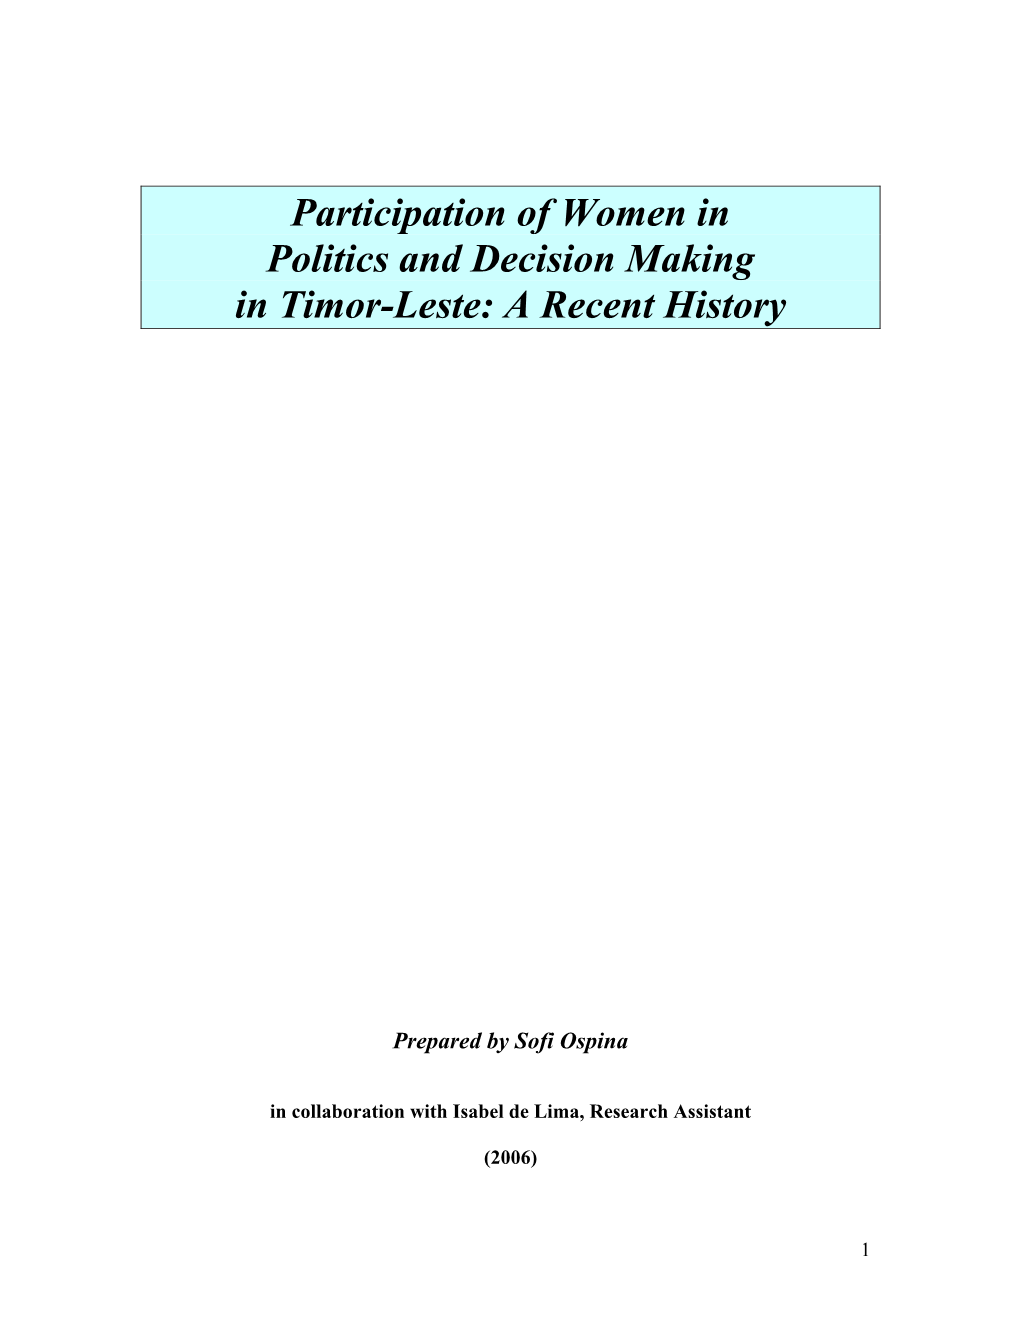 Participation of Women in Politics and Decision Making in Timor-Leste: a Recent History